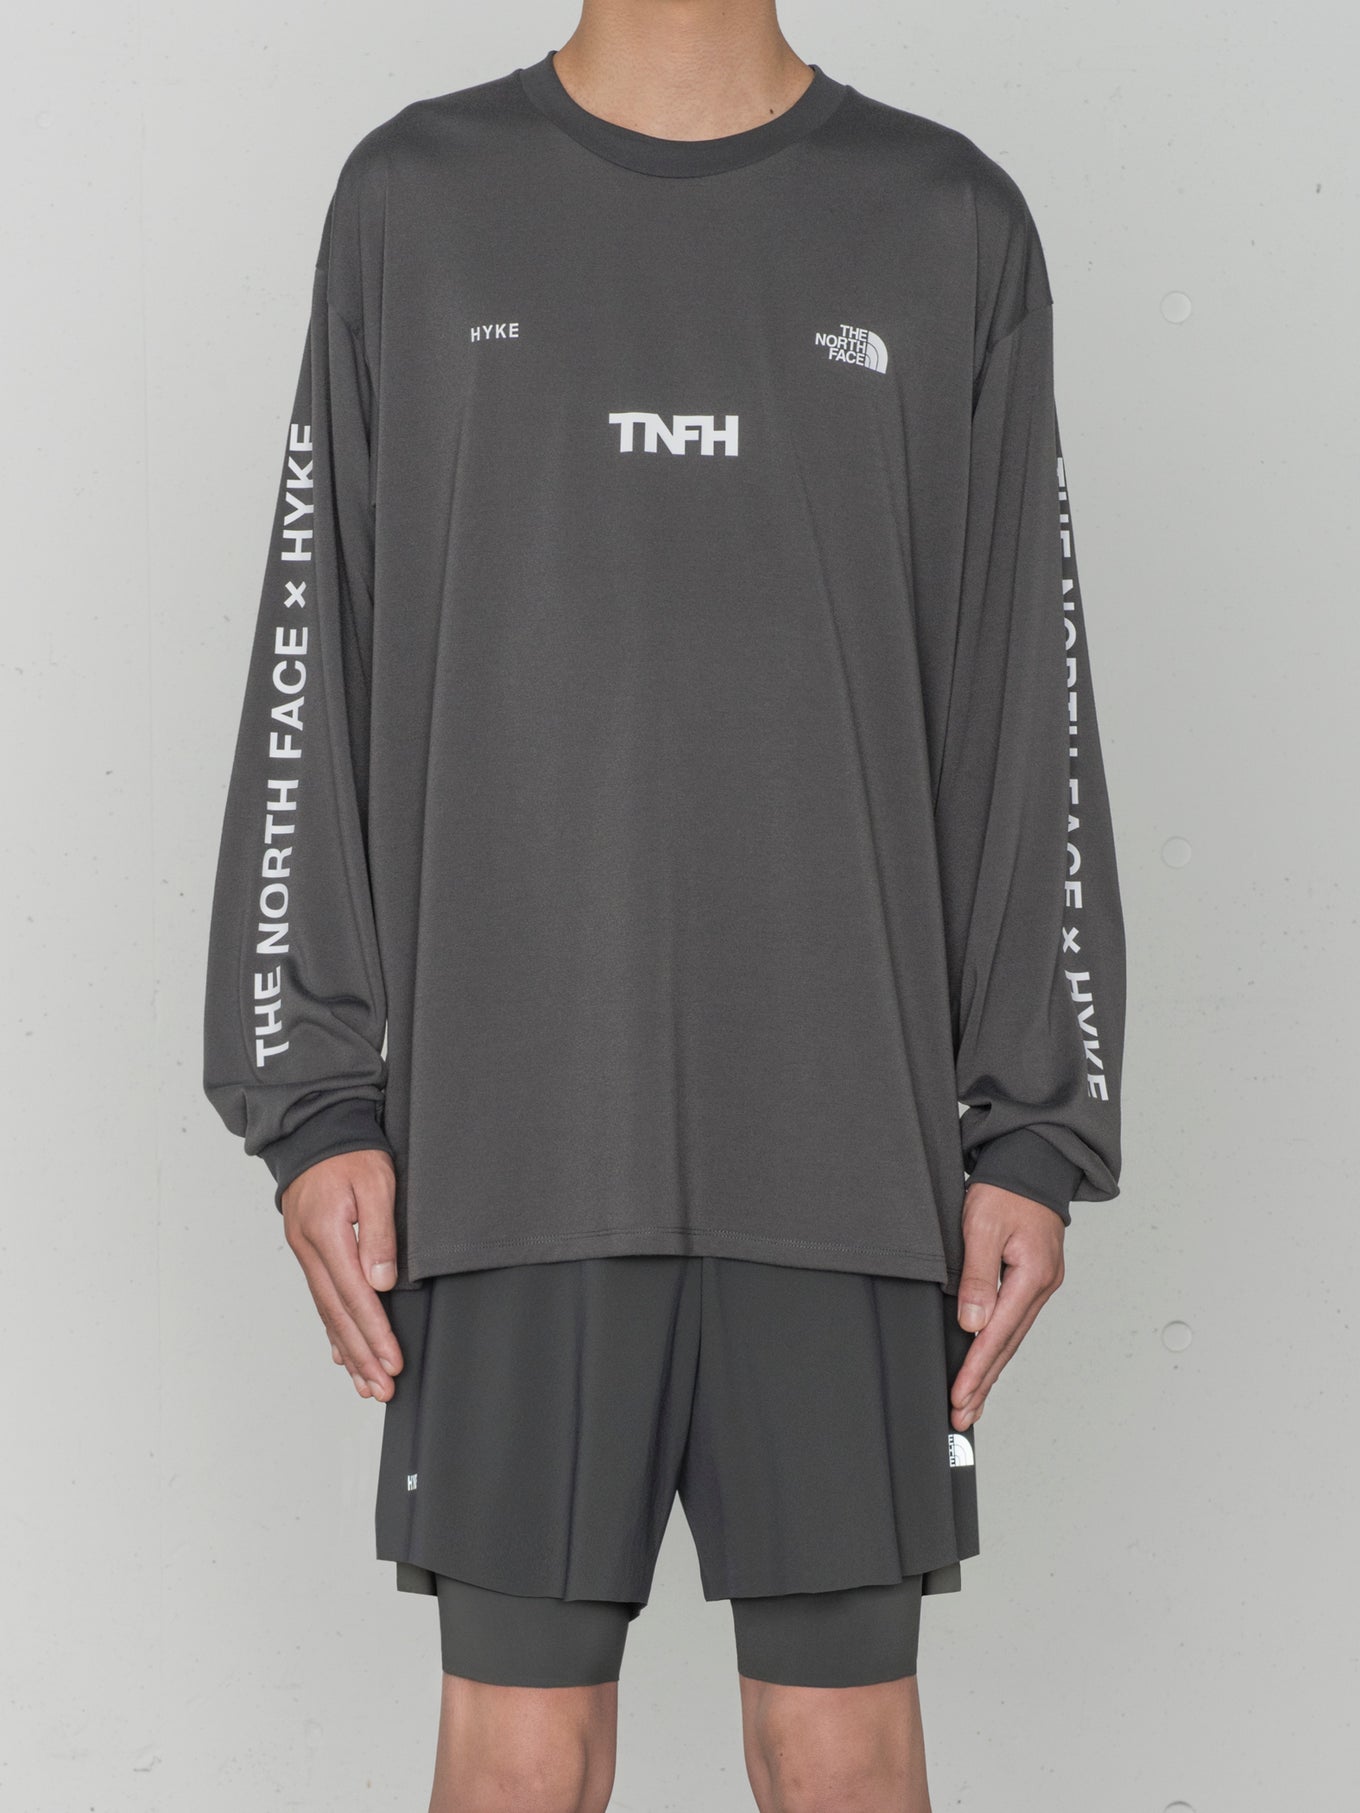 L/S ES Trail Crew (Mens)TNFH THE NORTH FACE × HYKE – HYKE ONLINE STORE